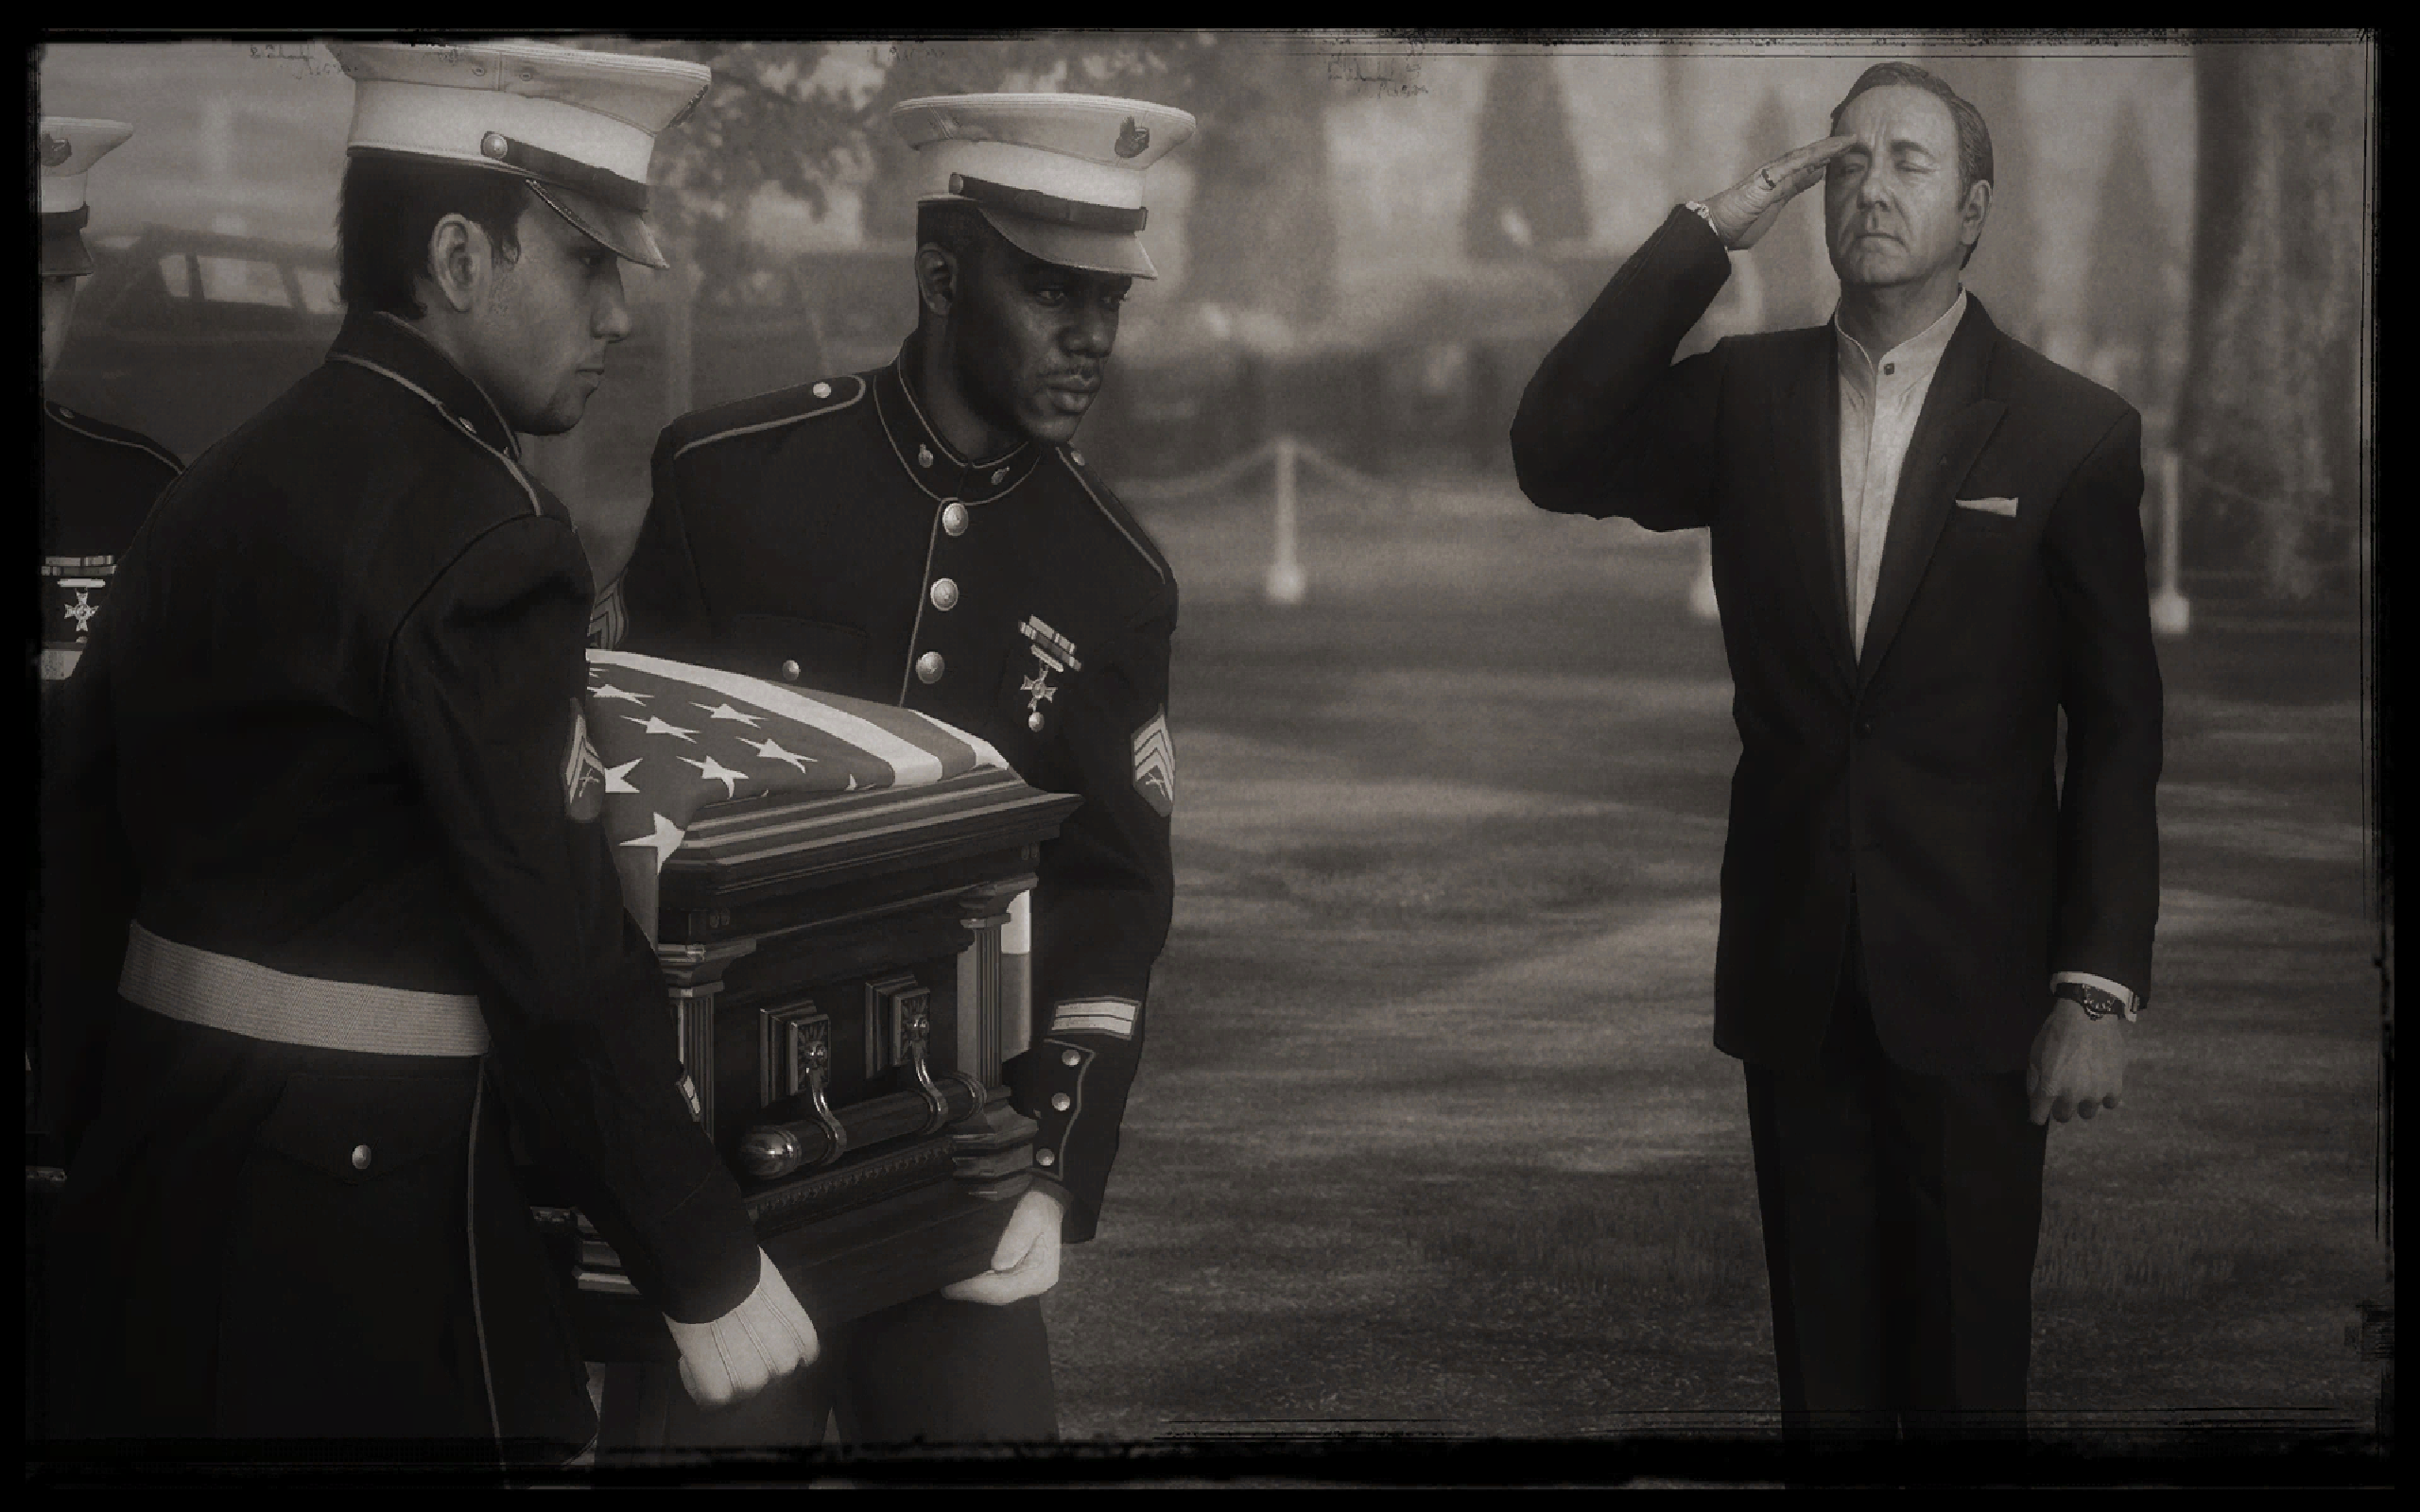 General 2560x1600 video games Call of Duty: Advanced Warfare monochrome salute video game characters CGI video game men uniform closed eyes Kevin Spacey United States Marine Corps cemetery